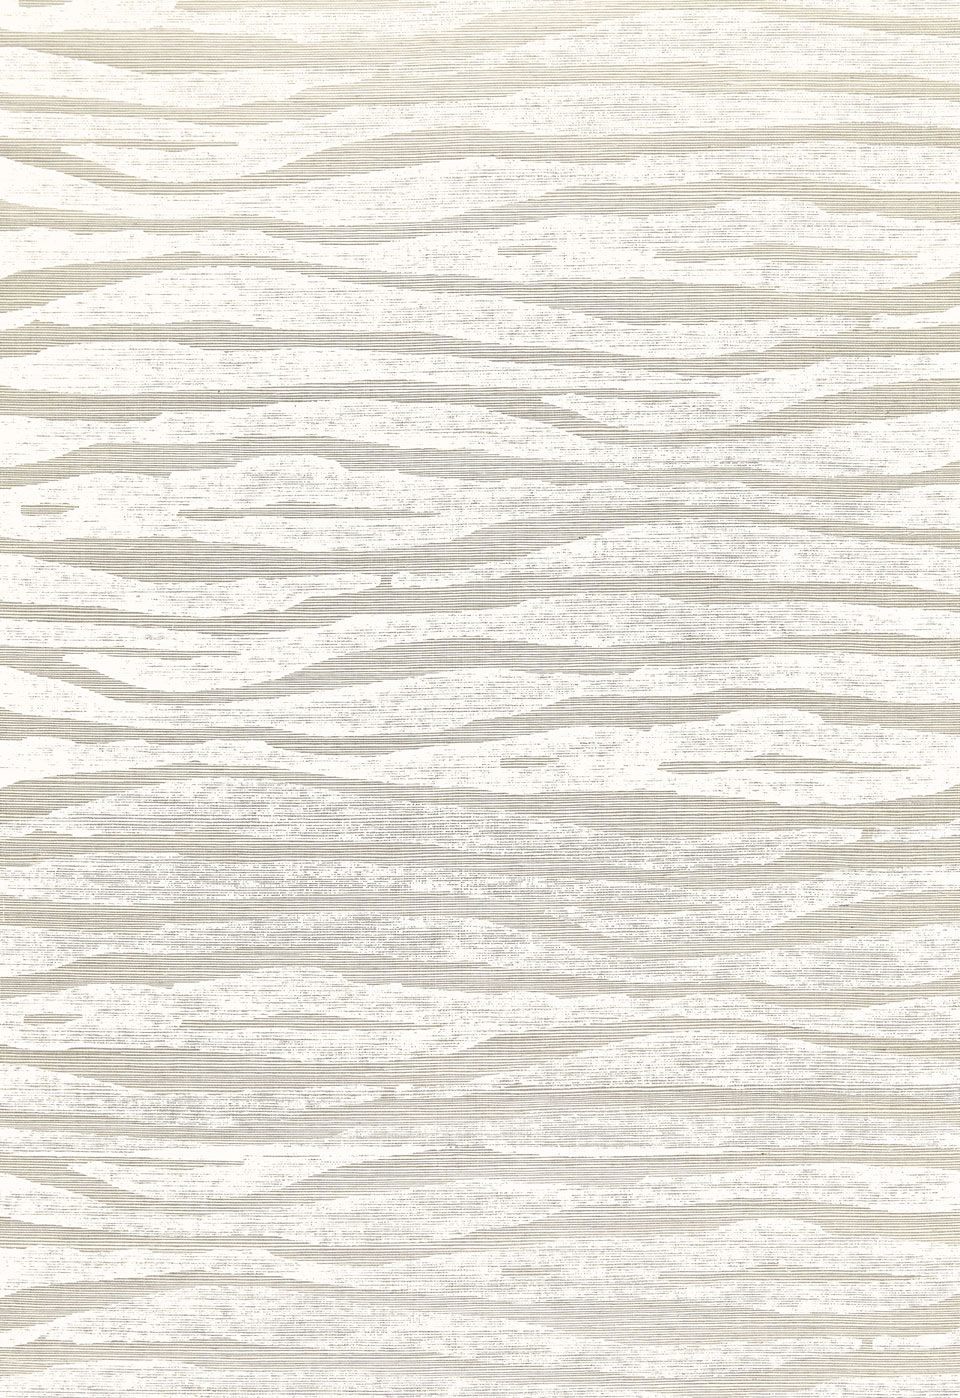 This Ripple in fogchalk has a sort of faux bois feel to it dont you